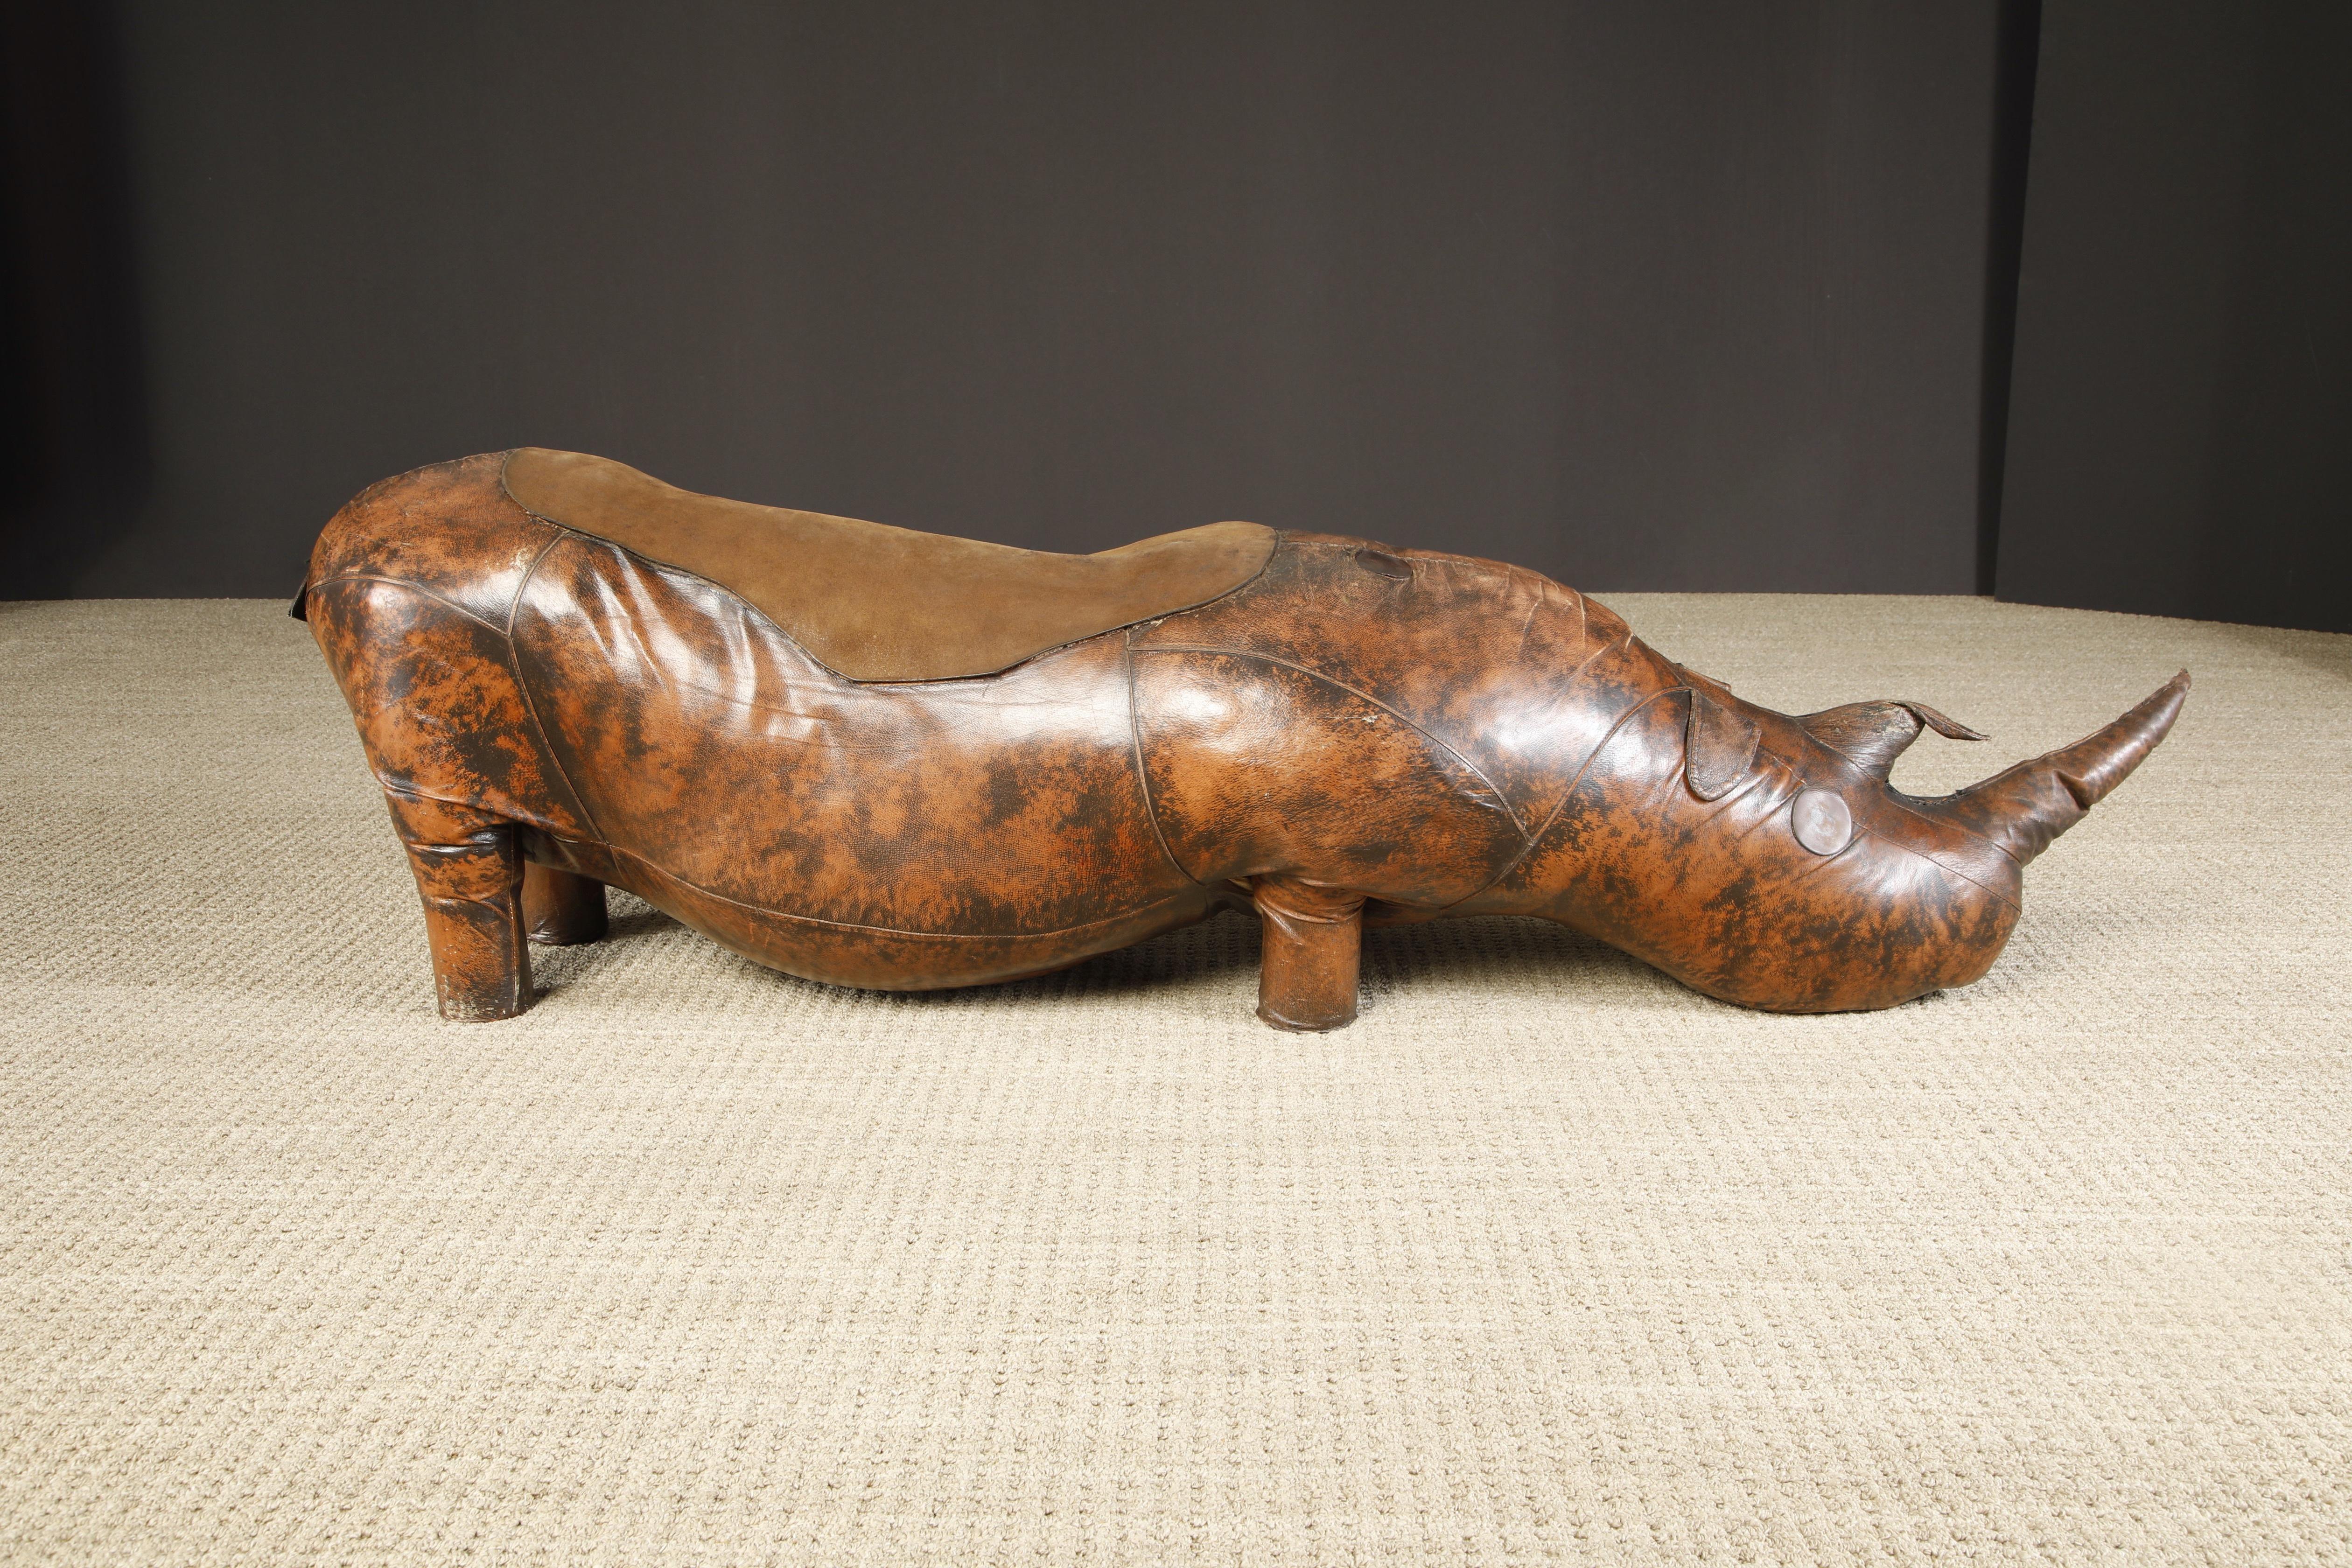 A rare vintage monumentally sized 80 inch long 'Superking' rhinoceros footstool by Valenti, Spain, circa 1970s. This example is signed with the 'Valenti Made in Spain' stamp on its underside. Similar to leather animal designs by Dimitri Omersa for